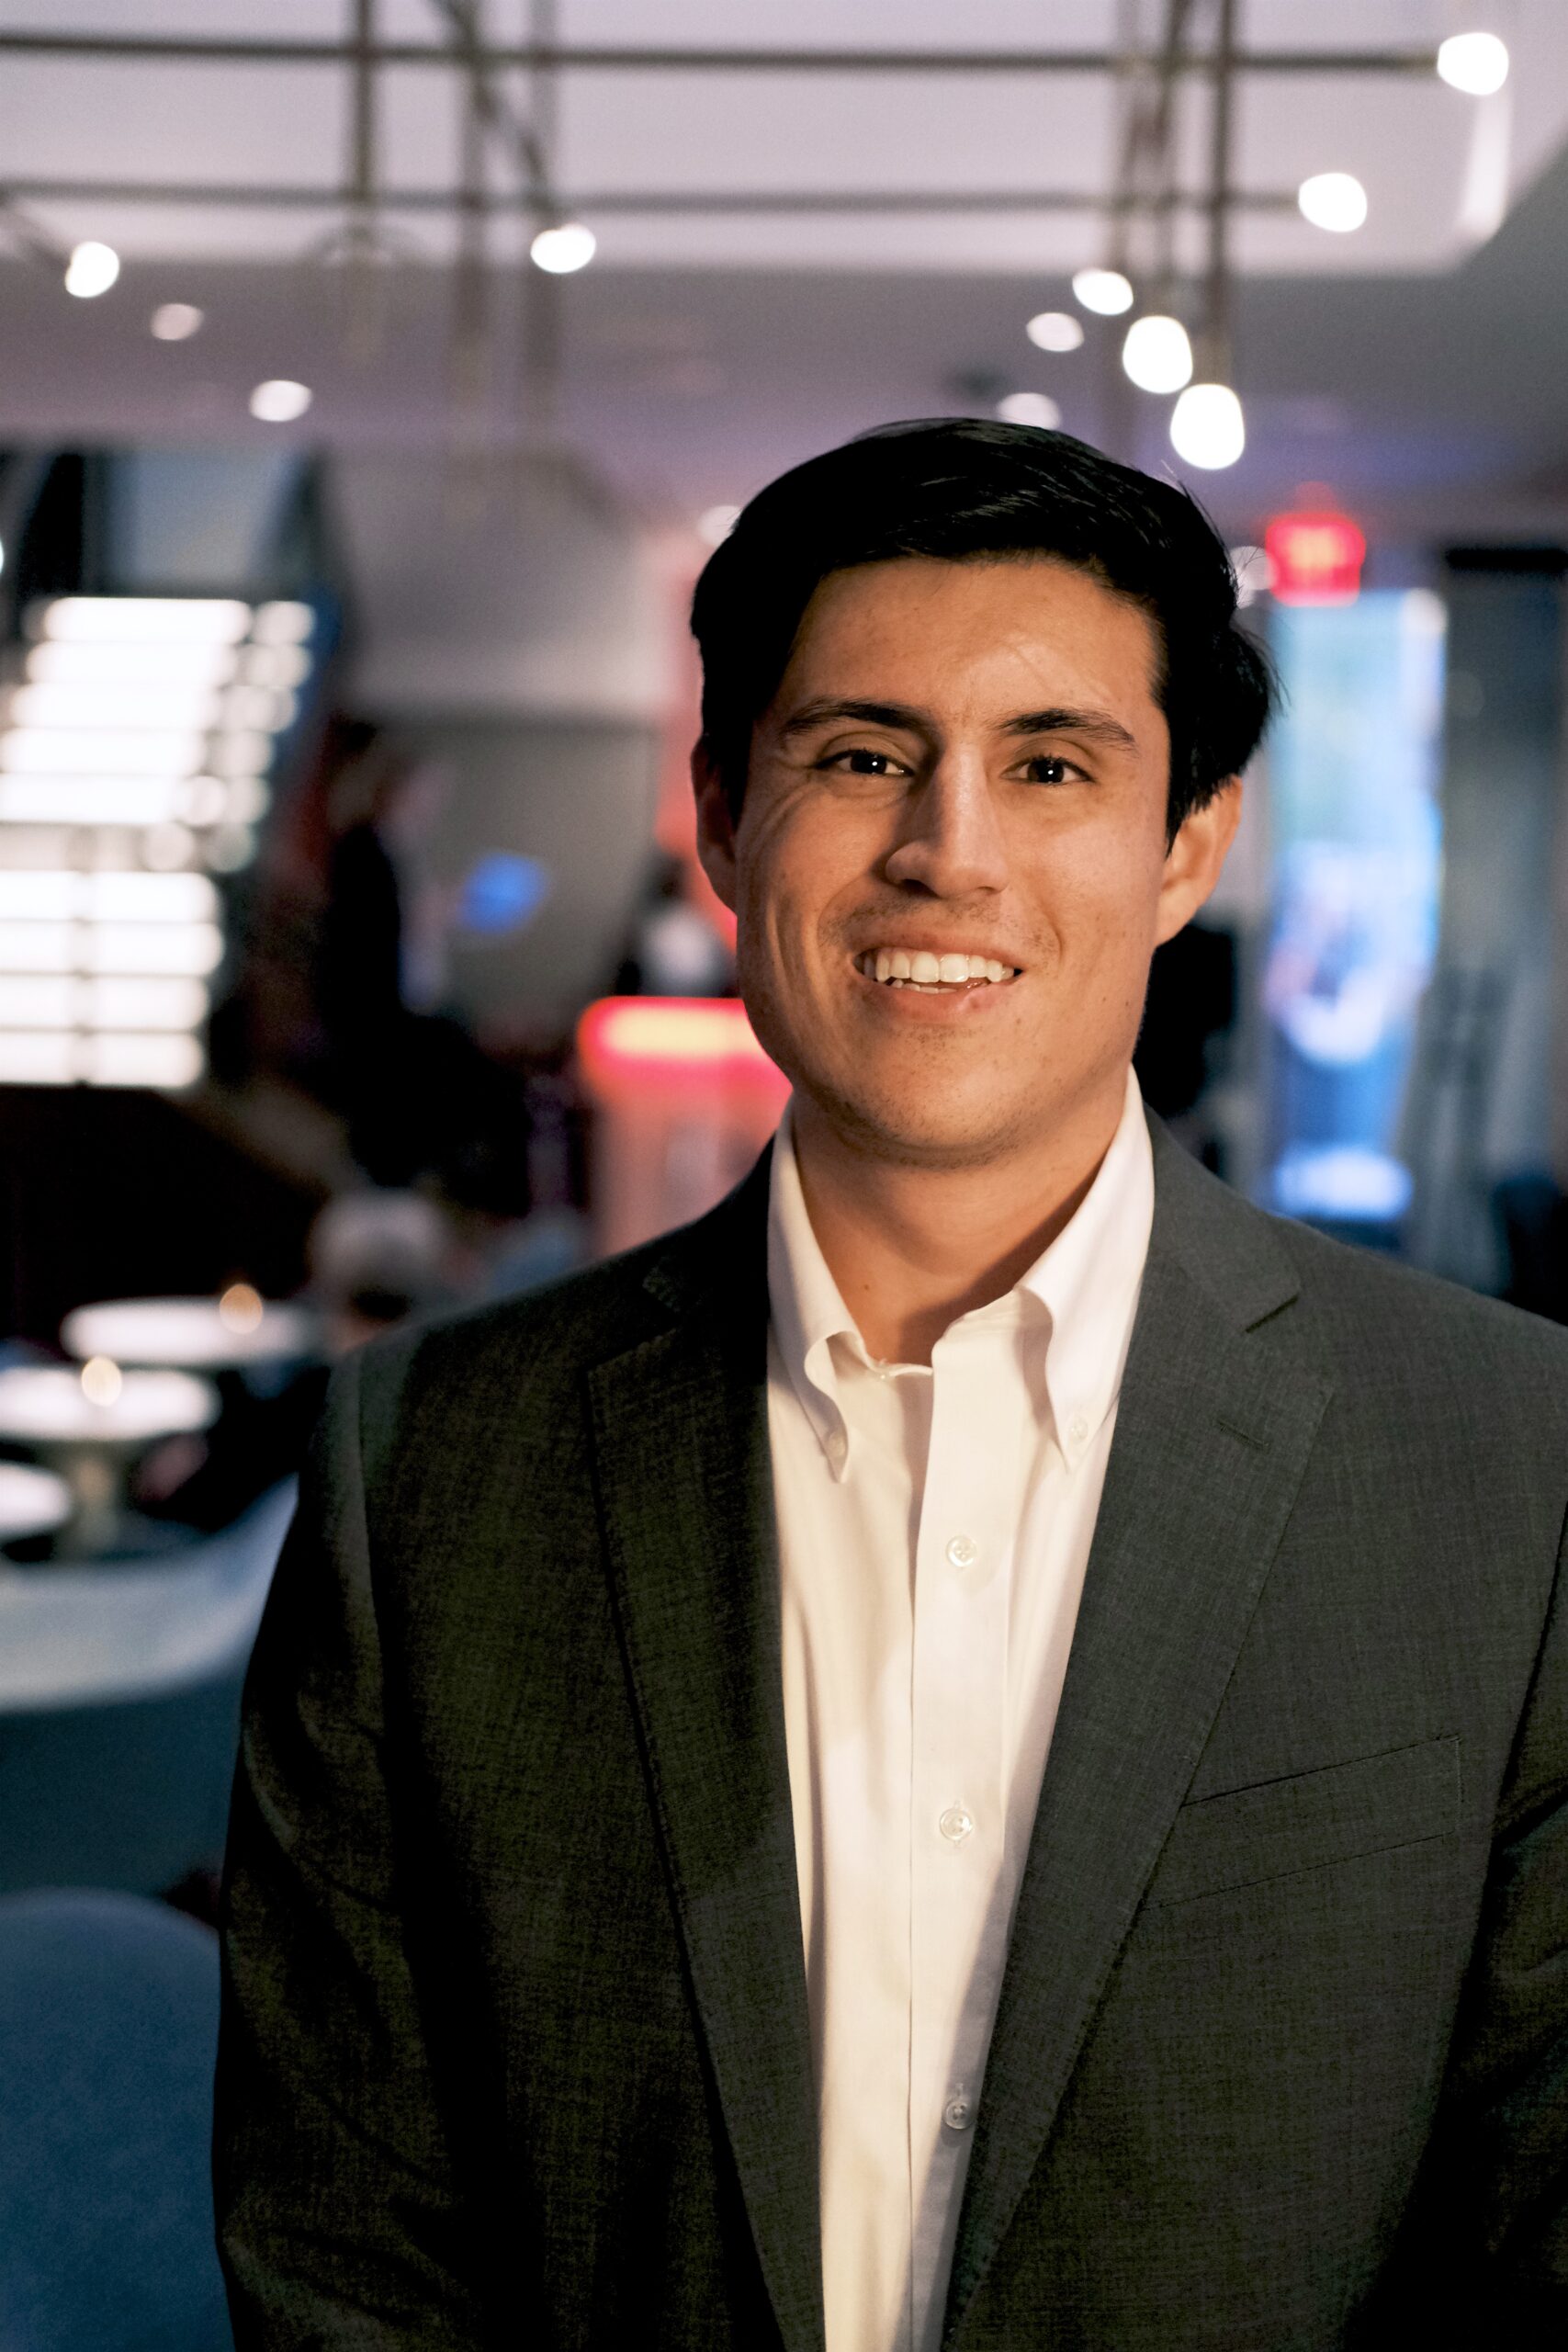 Headshot of Brendan Montesinos standing in a dress shirt and coat with lights in the background.